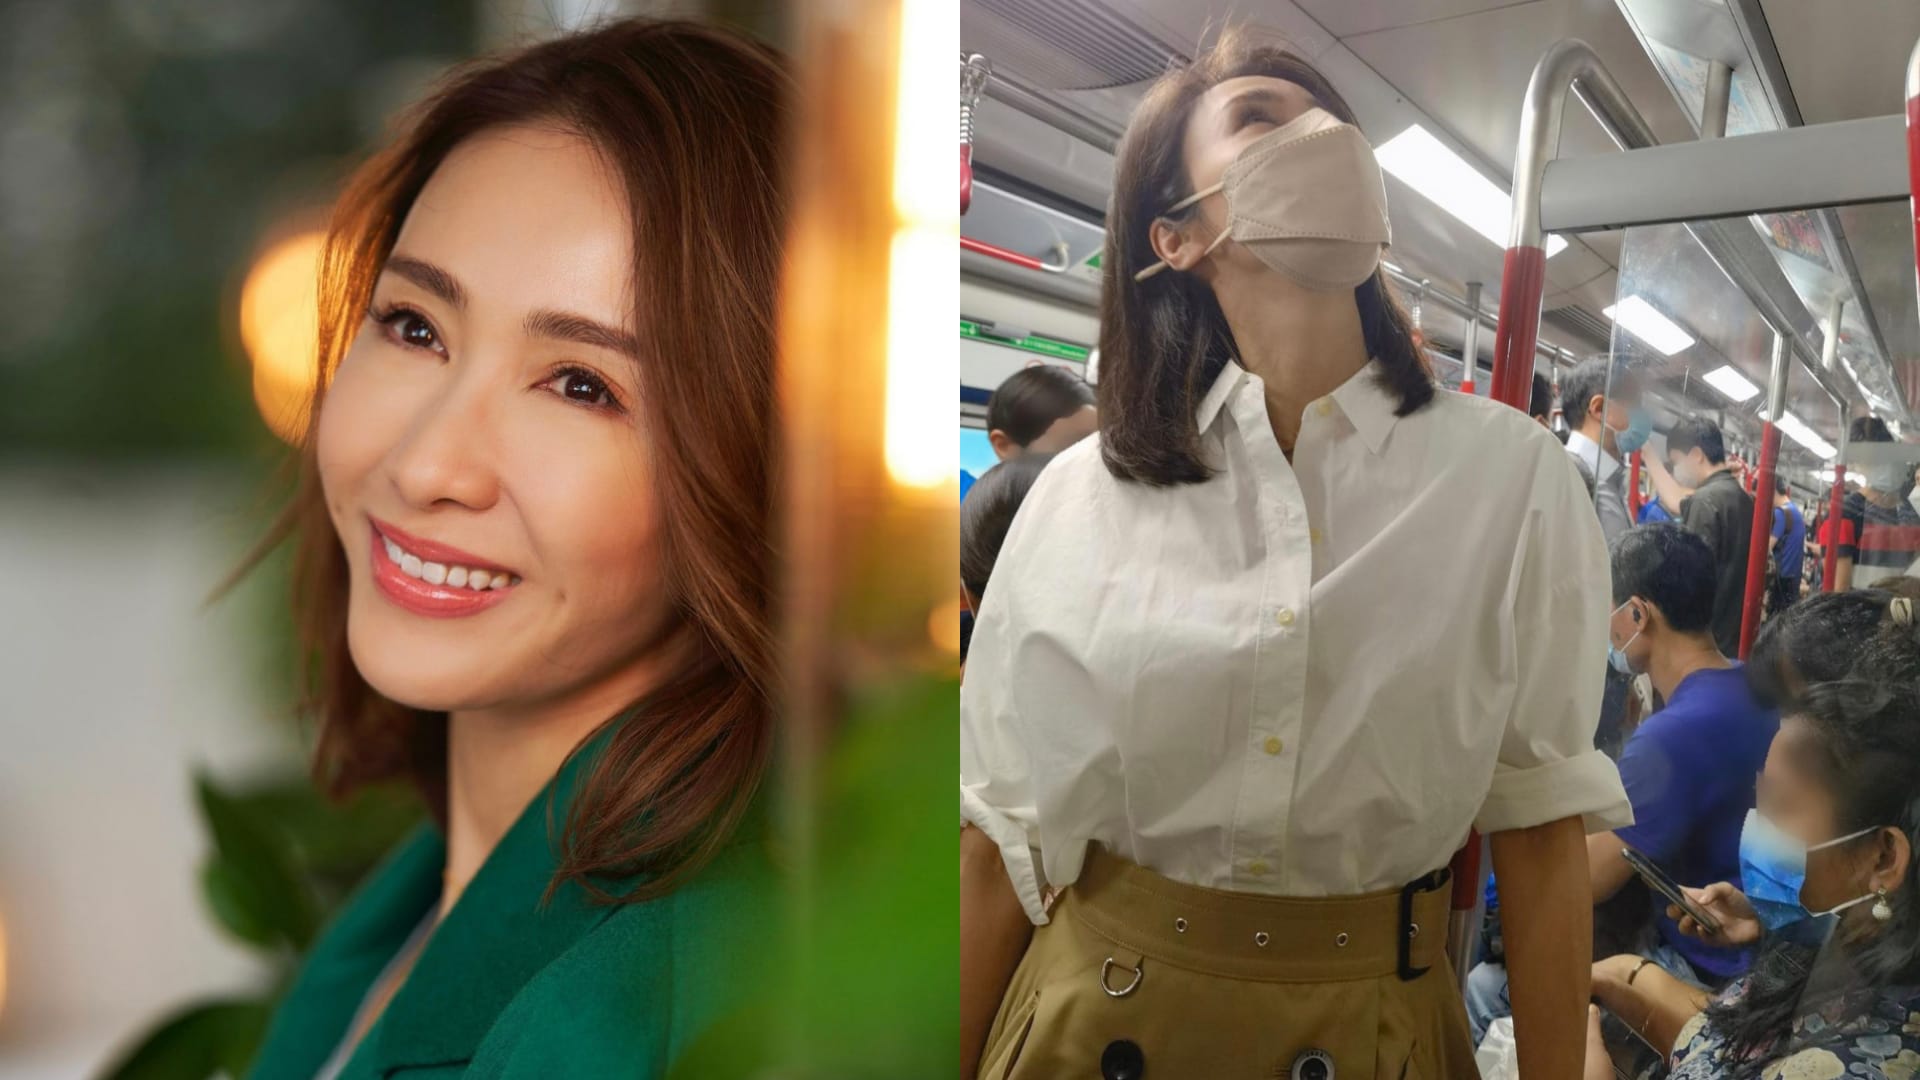 Gigi Lai, Whose Net Worth Has Gone Up By S$56mil, Praised For Taking The Subway With Her Daughter